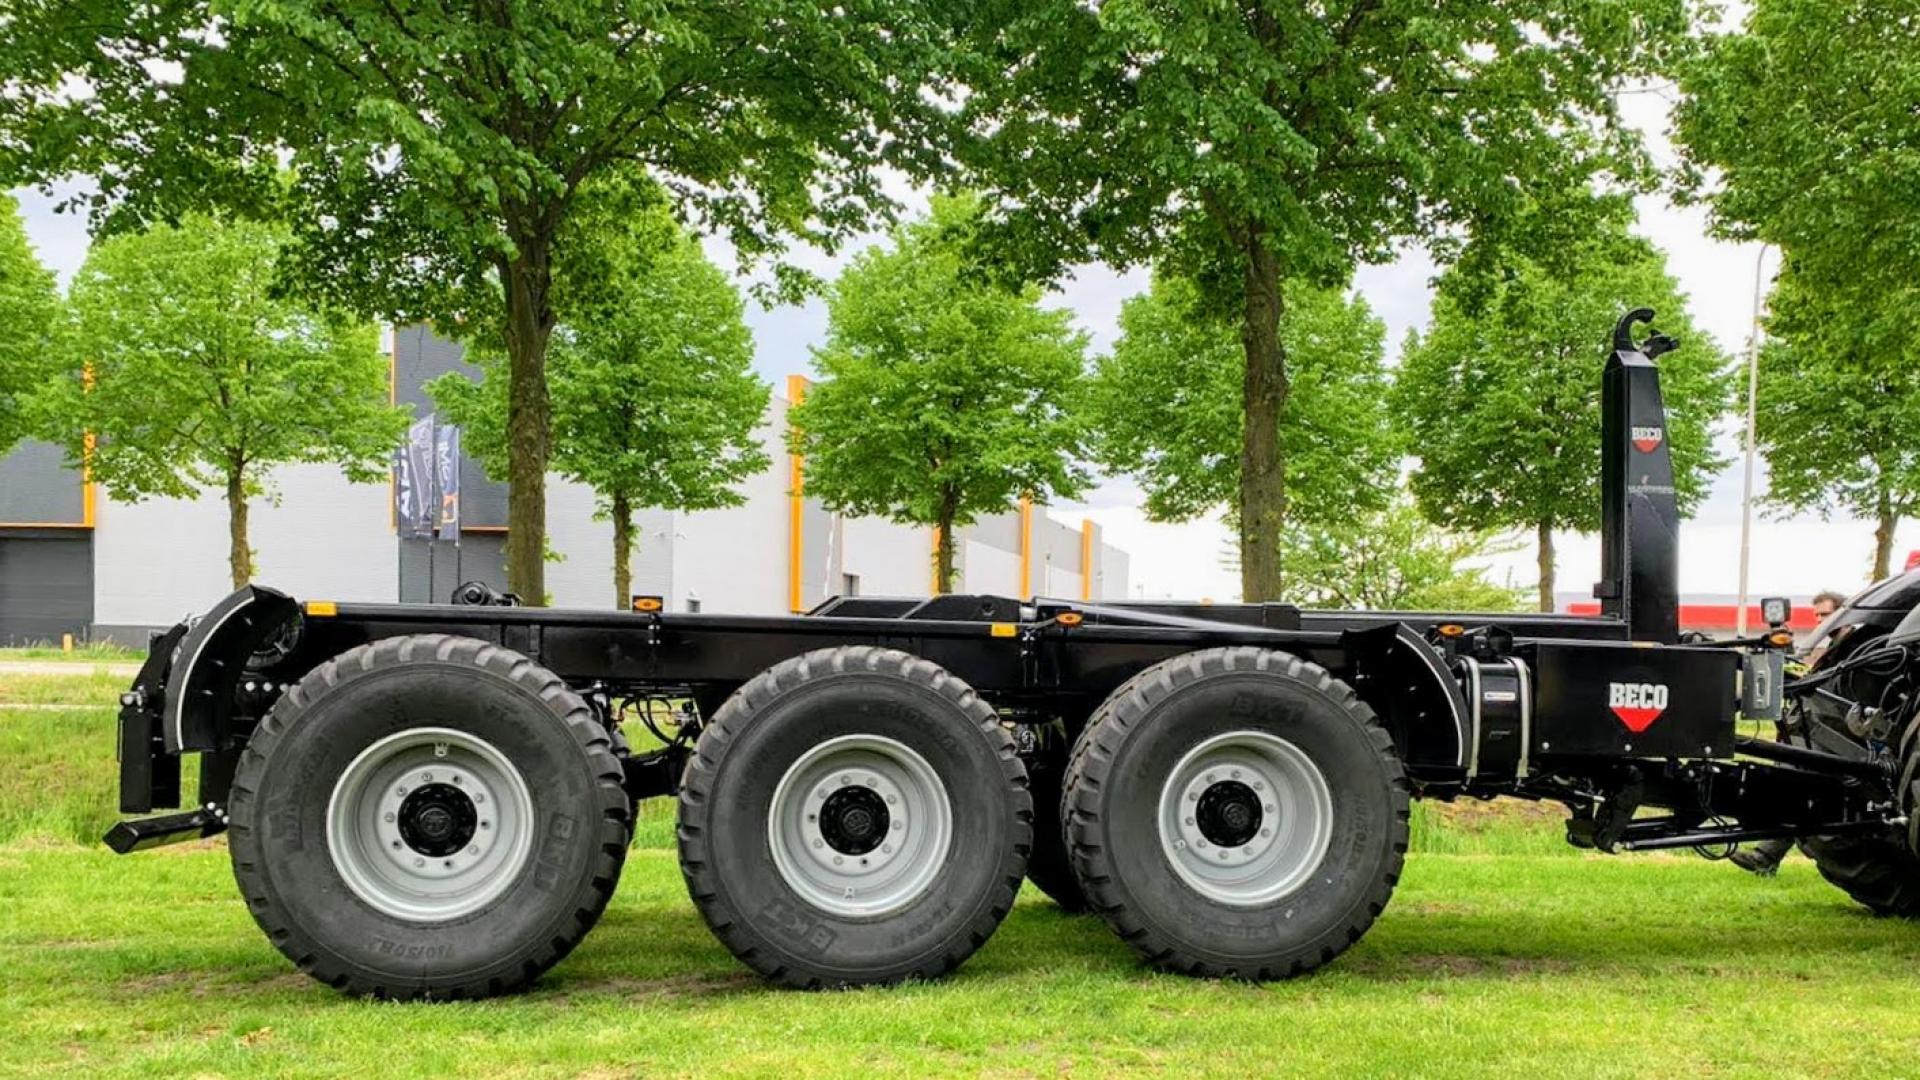 Extremely suitable for agriculture: Beco hooklift carrier